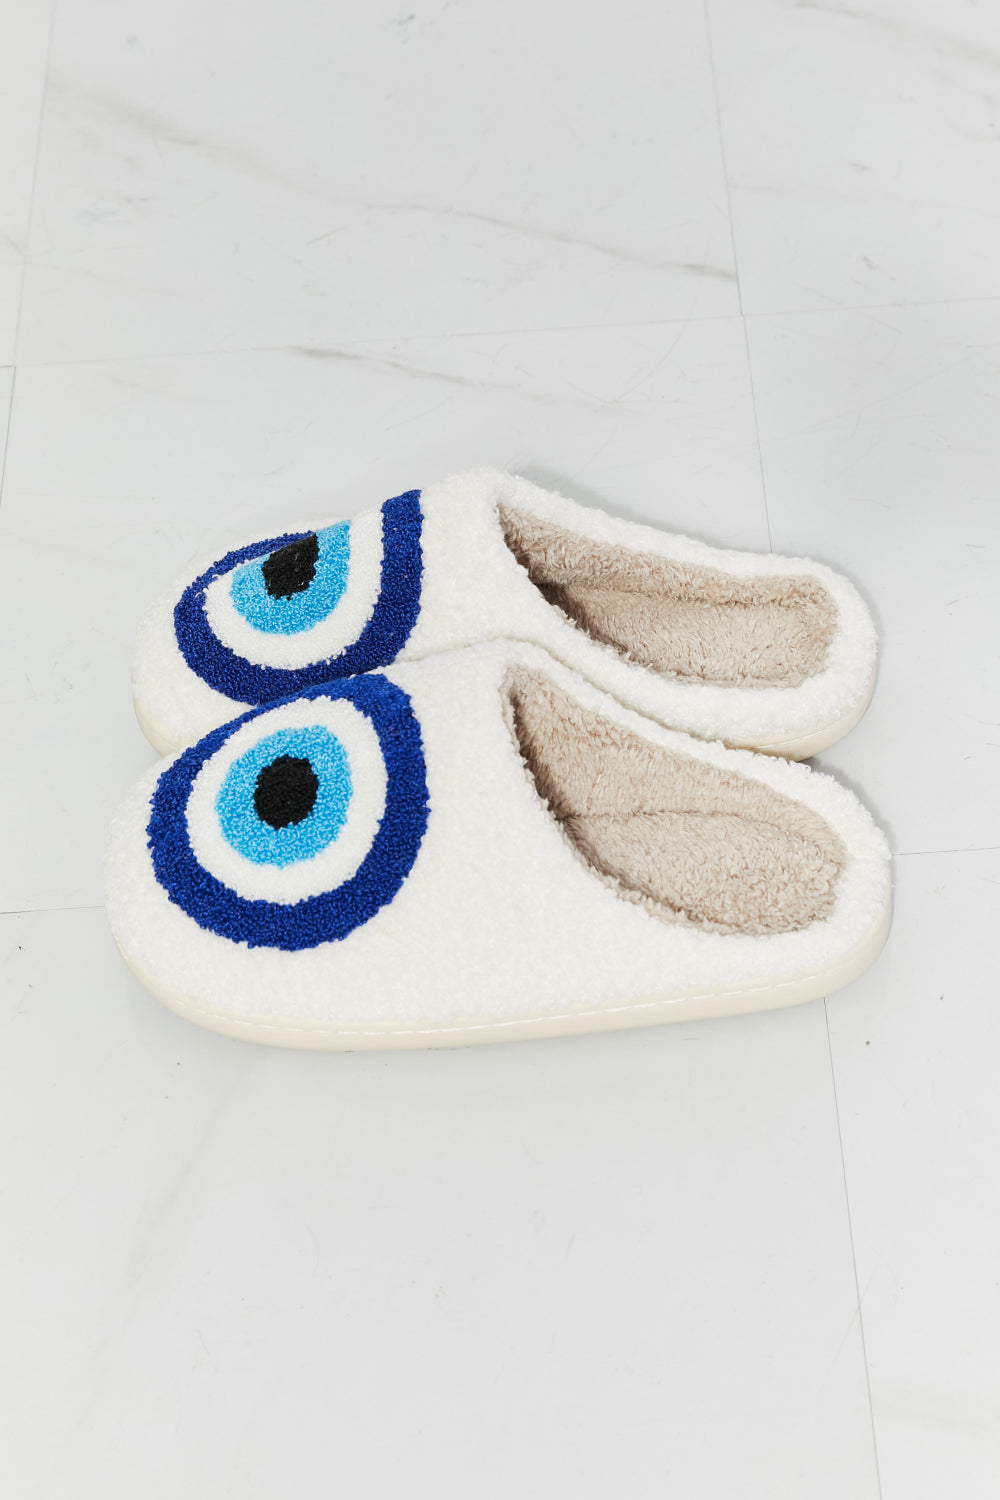 MMShoes Evil Eye Teddy Bear Fuzzy Plush Slide On Blue and White Comfy Slippers